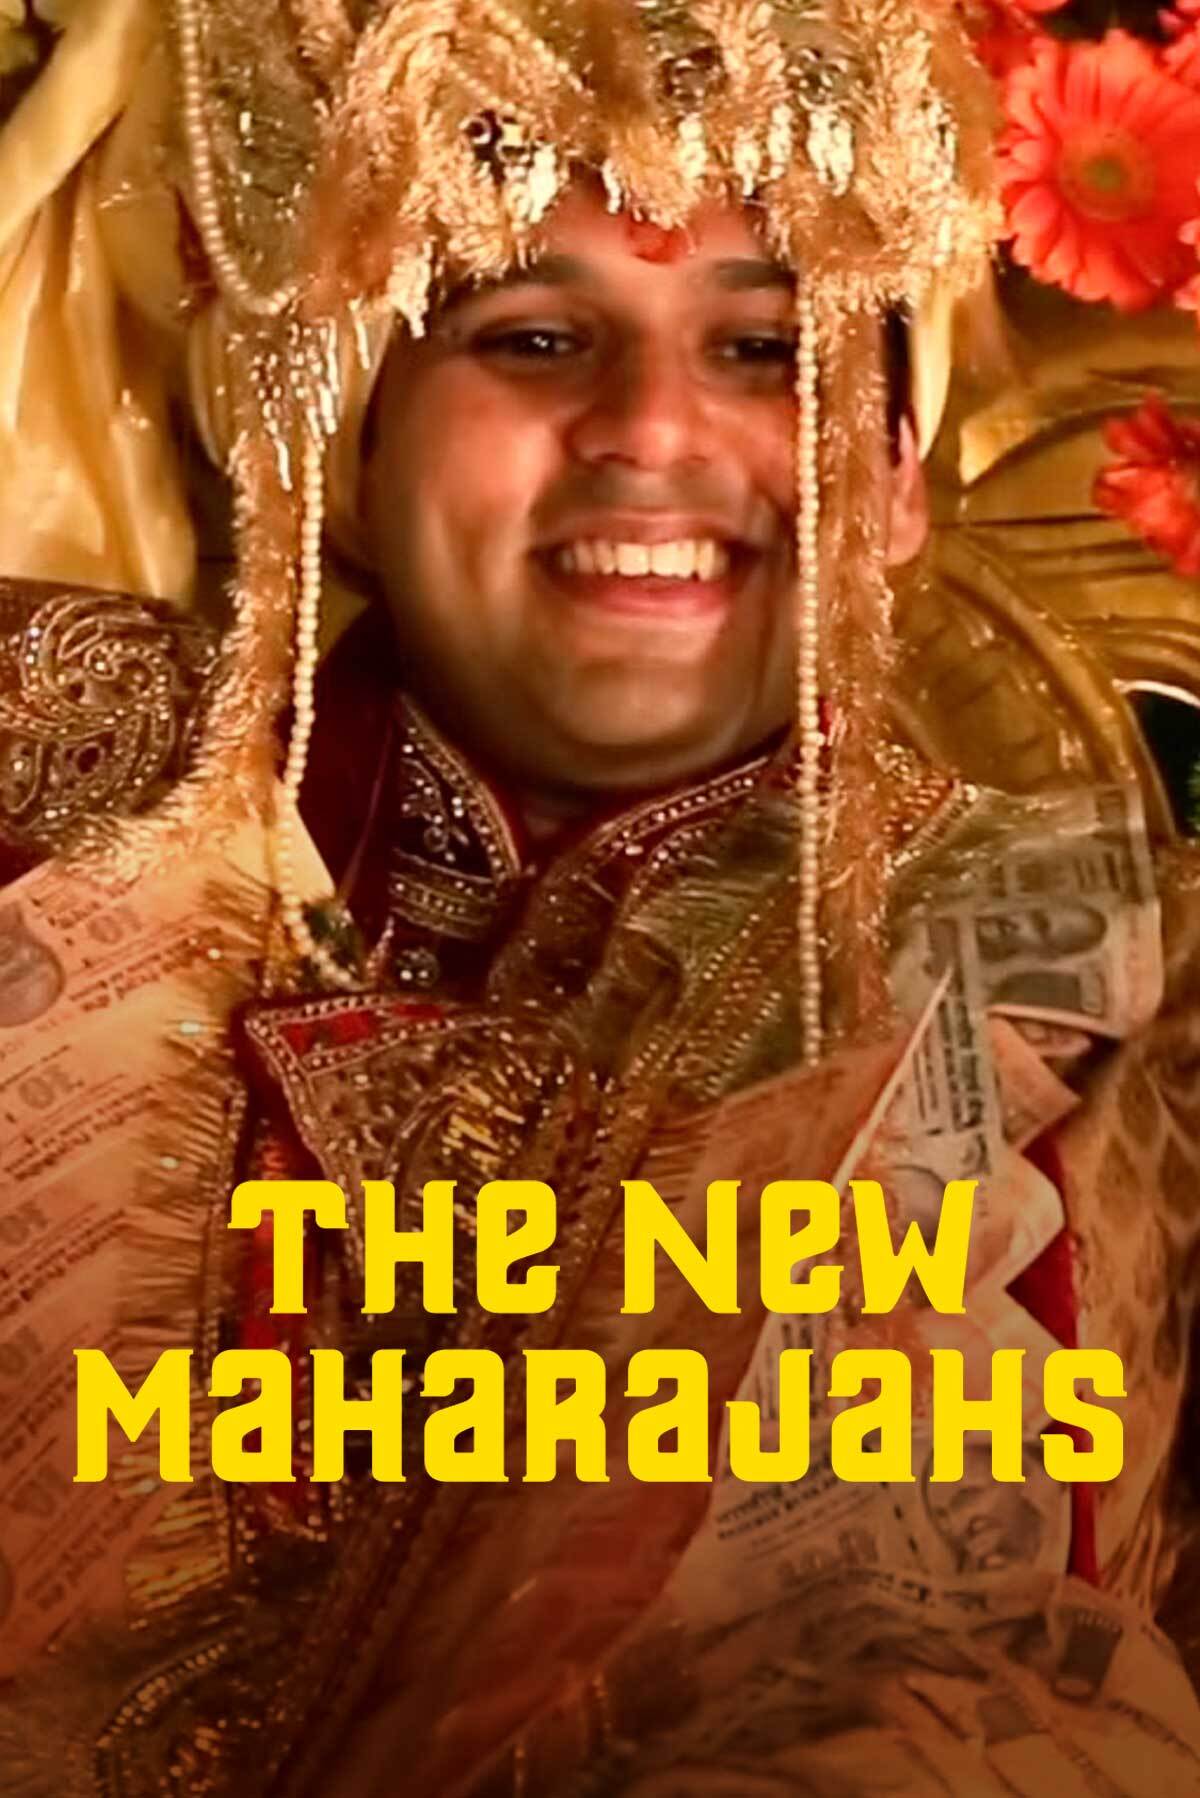 The New Maharajahs